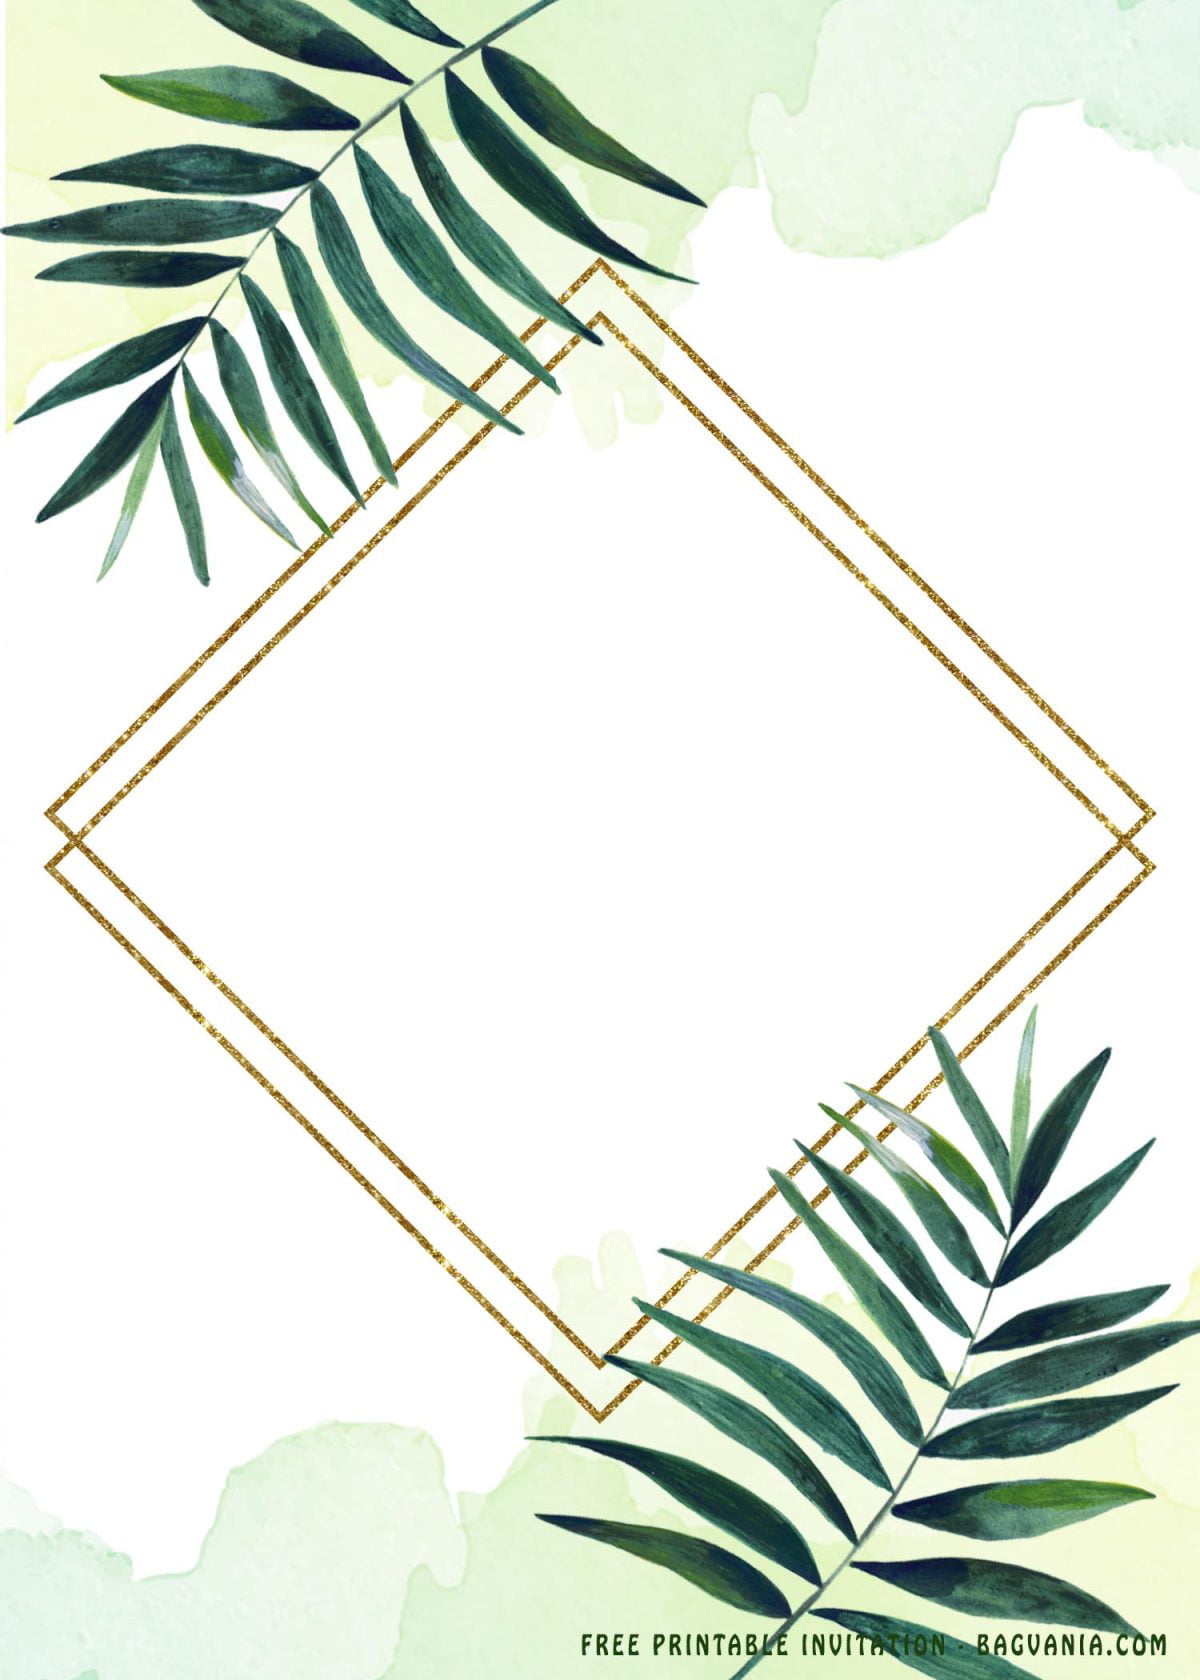 Free Printable Greenery Gold Frame Invitation Templates With Palm Leaves